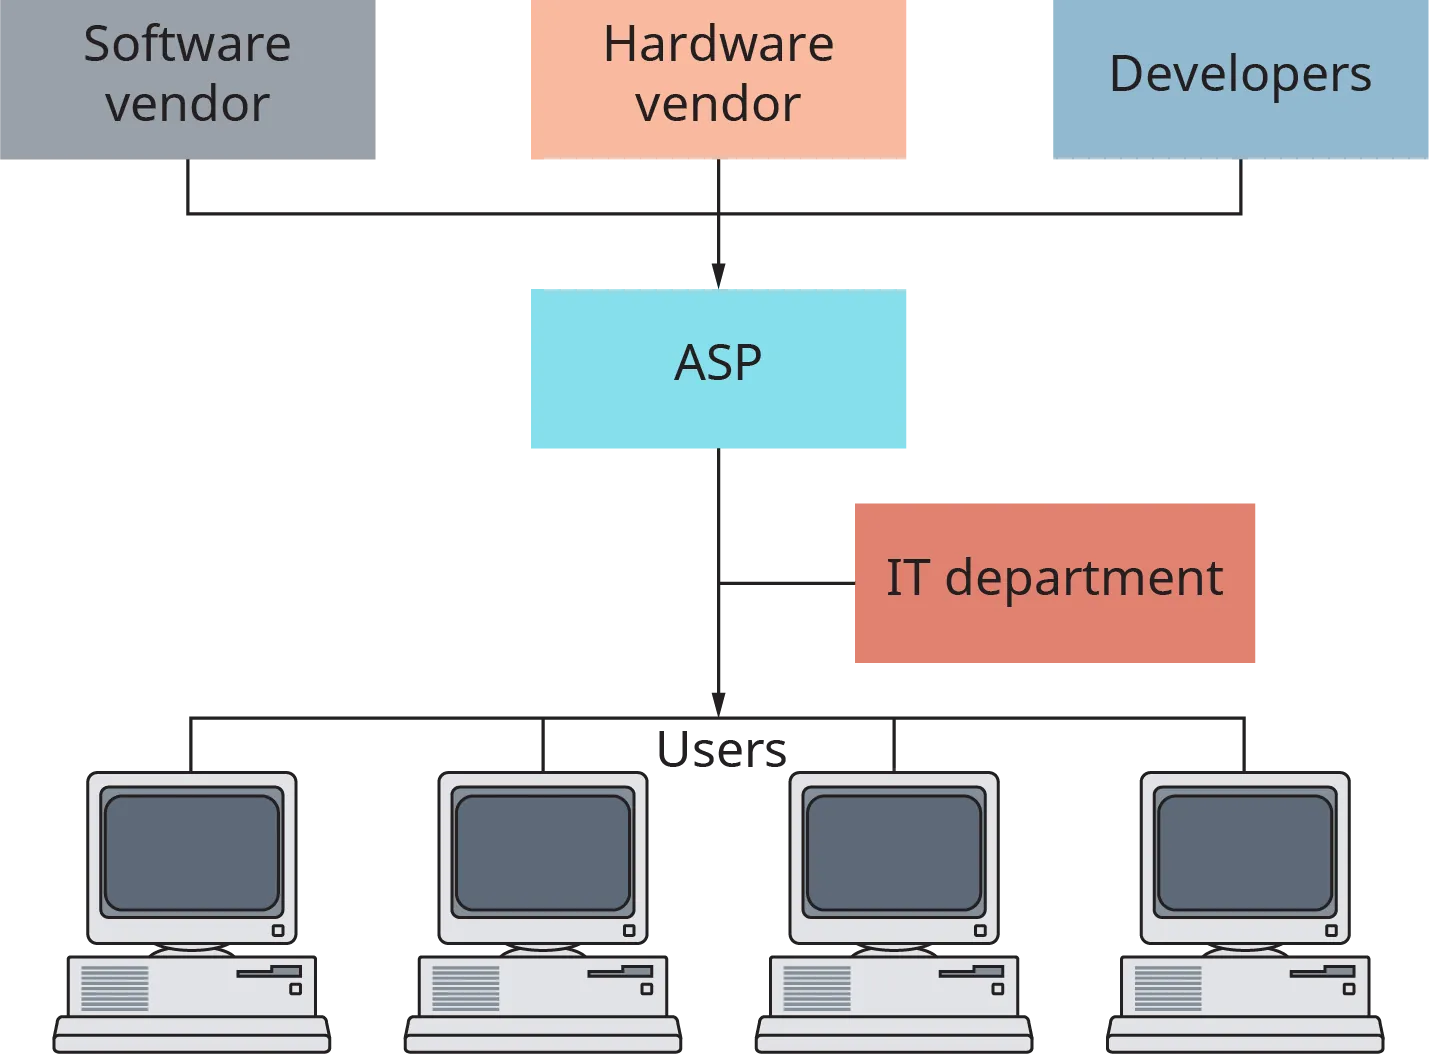 A diagram shows that a software vendor, hardware vendor, and developers all flow into an A S P, which then flows into an audience of users. Between the A S P and the users is the I T department.